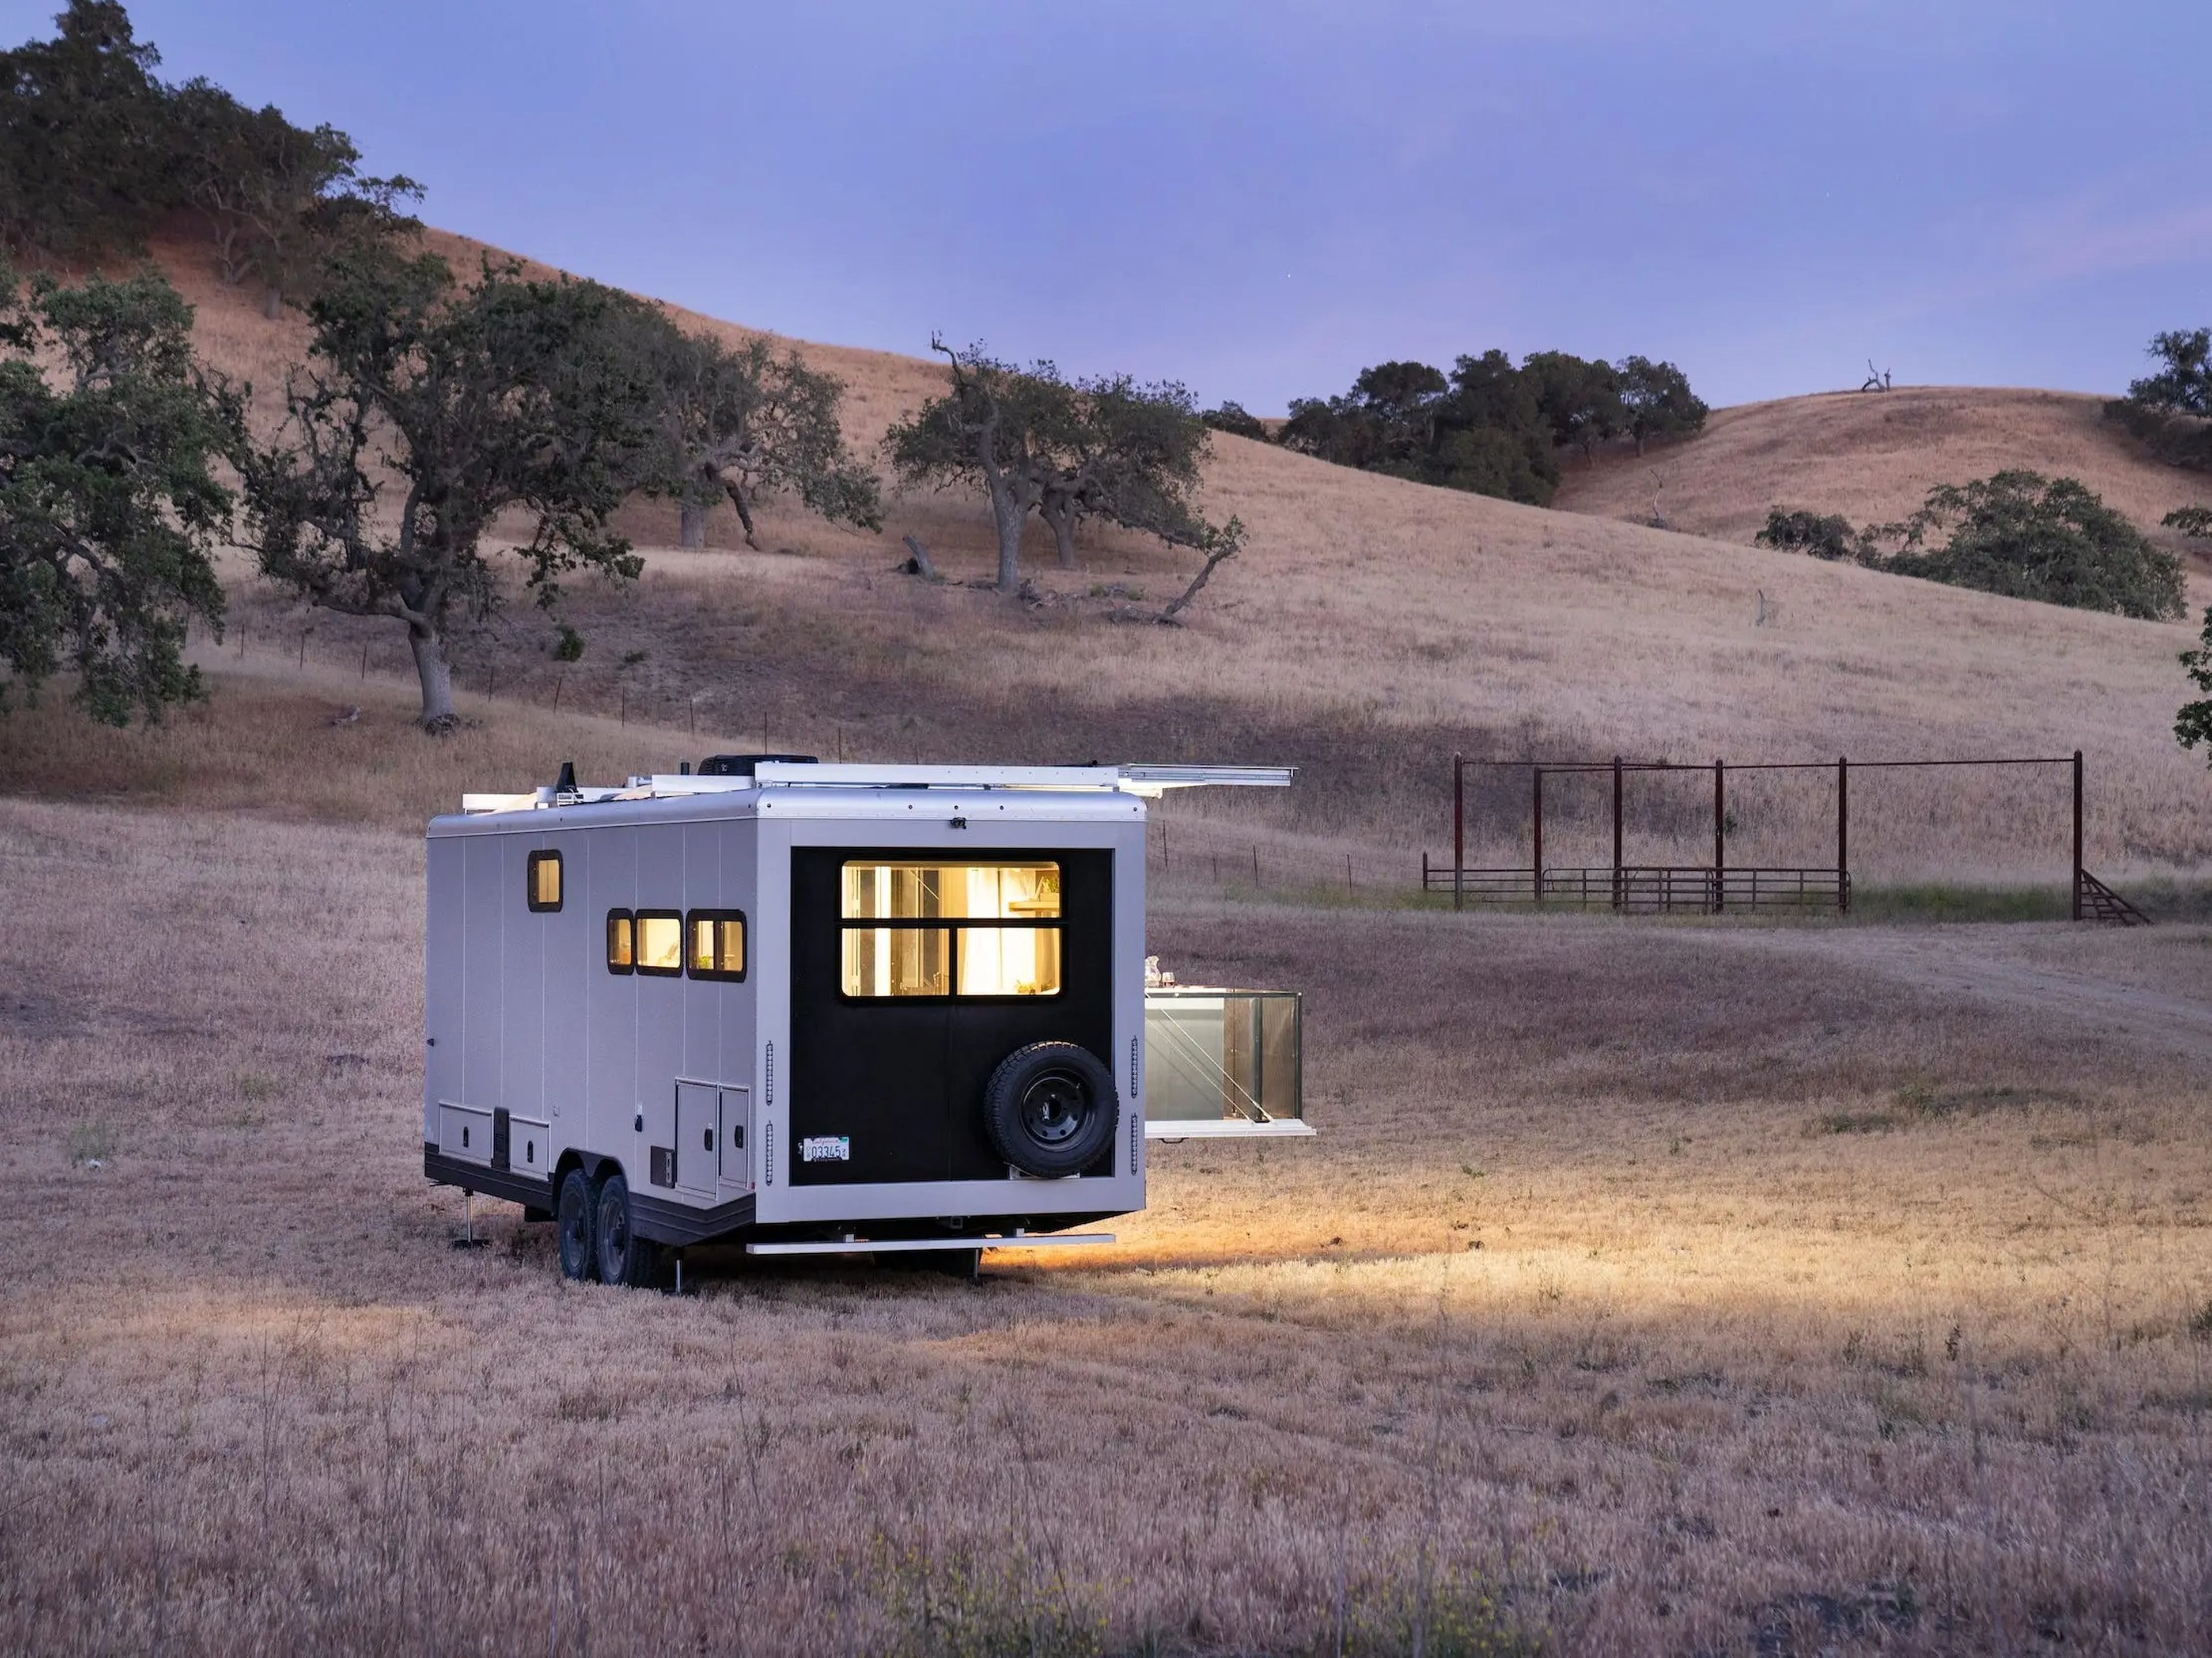 The exterior of the travel trailer as it sits on a brown field at dusk. The lights are on inside.